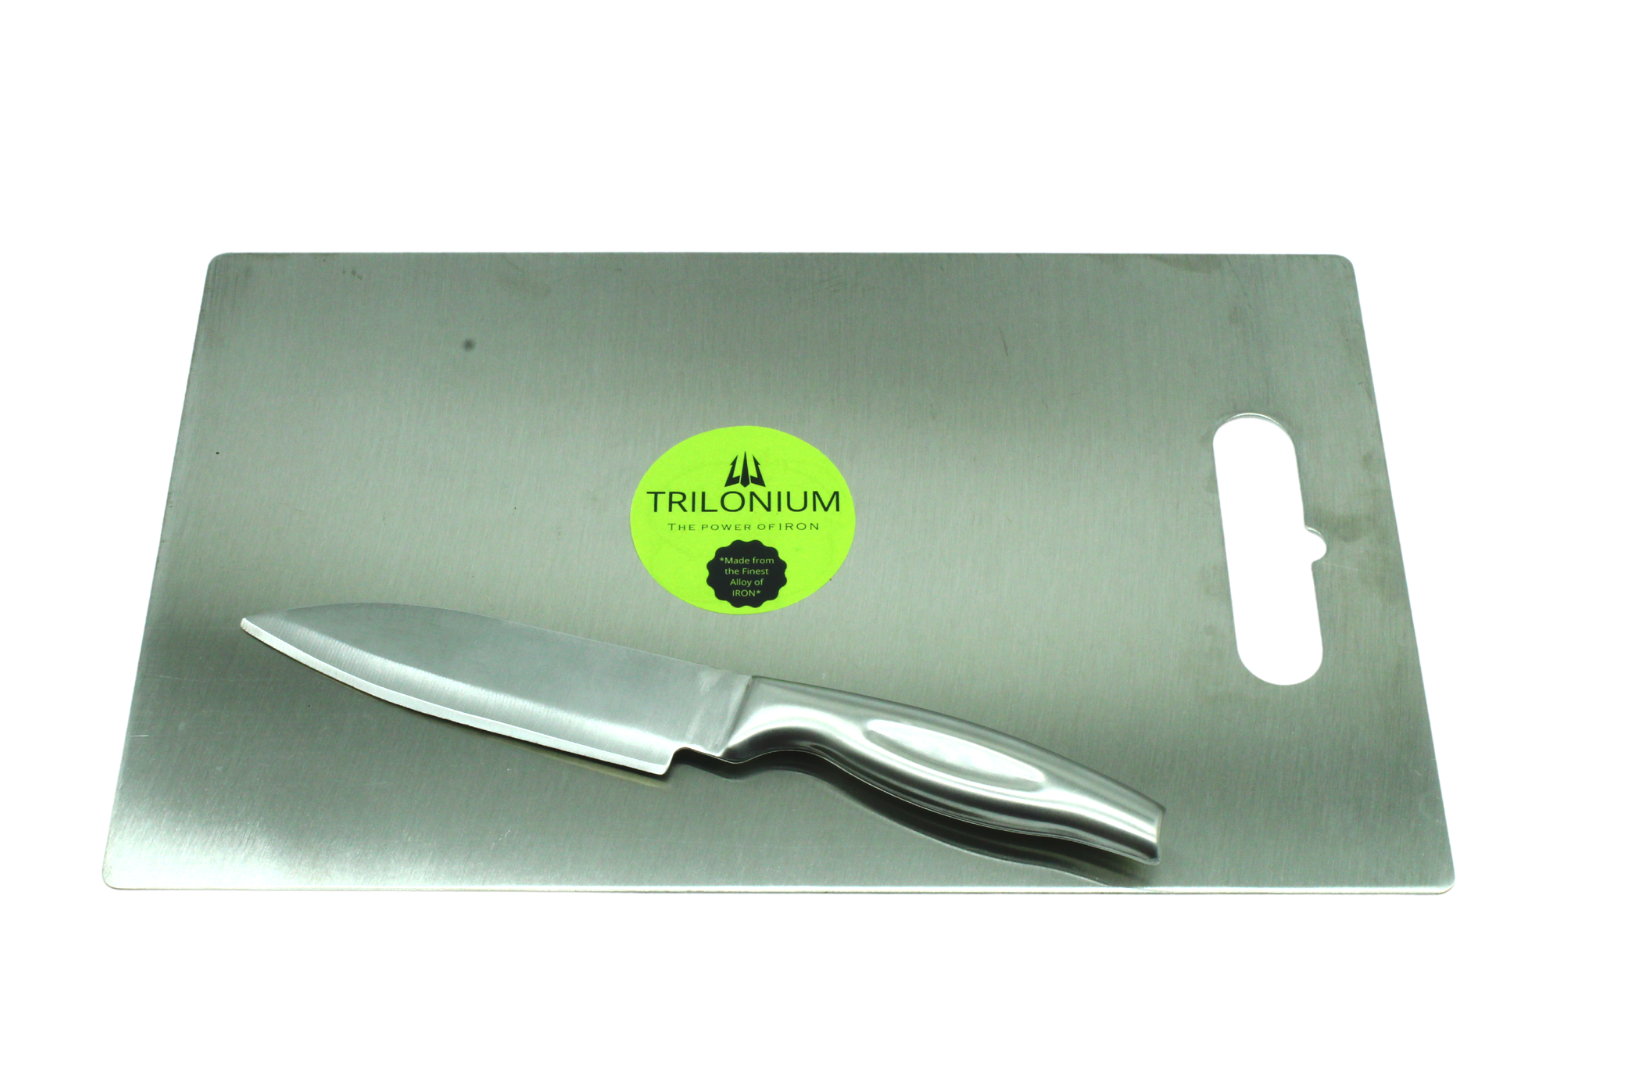 Stainless Steel Chopping | Cutting Board | Size No: 3 - 39cm X 26cm | Thickness: 2mm + 1 Pcs Knife | Combo TRILONIUM | Cast Iron Cookware